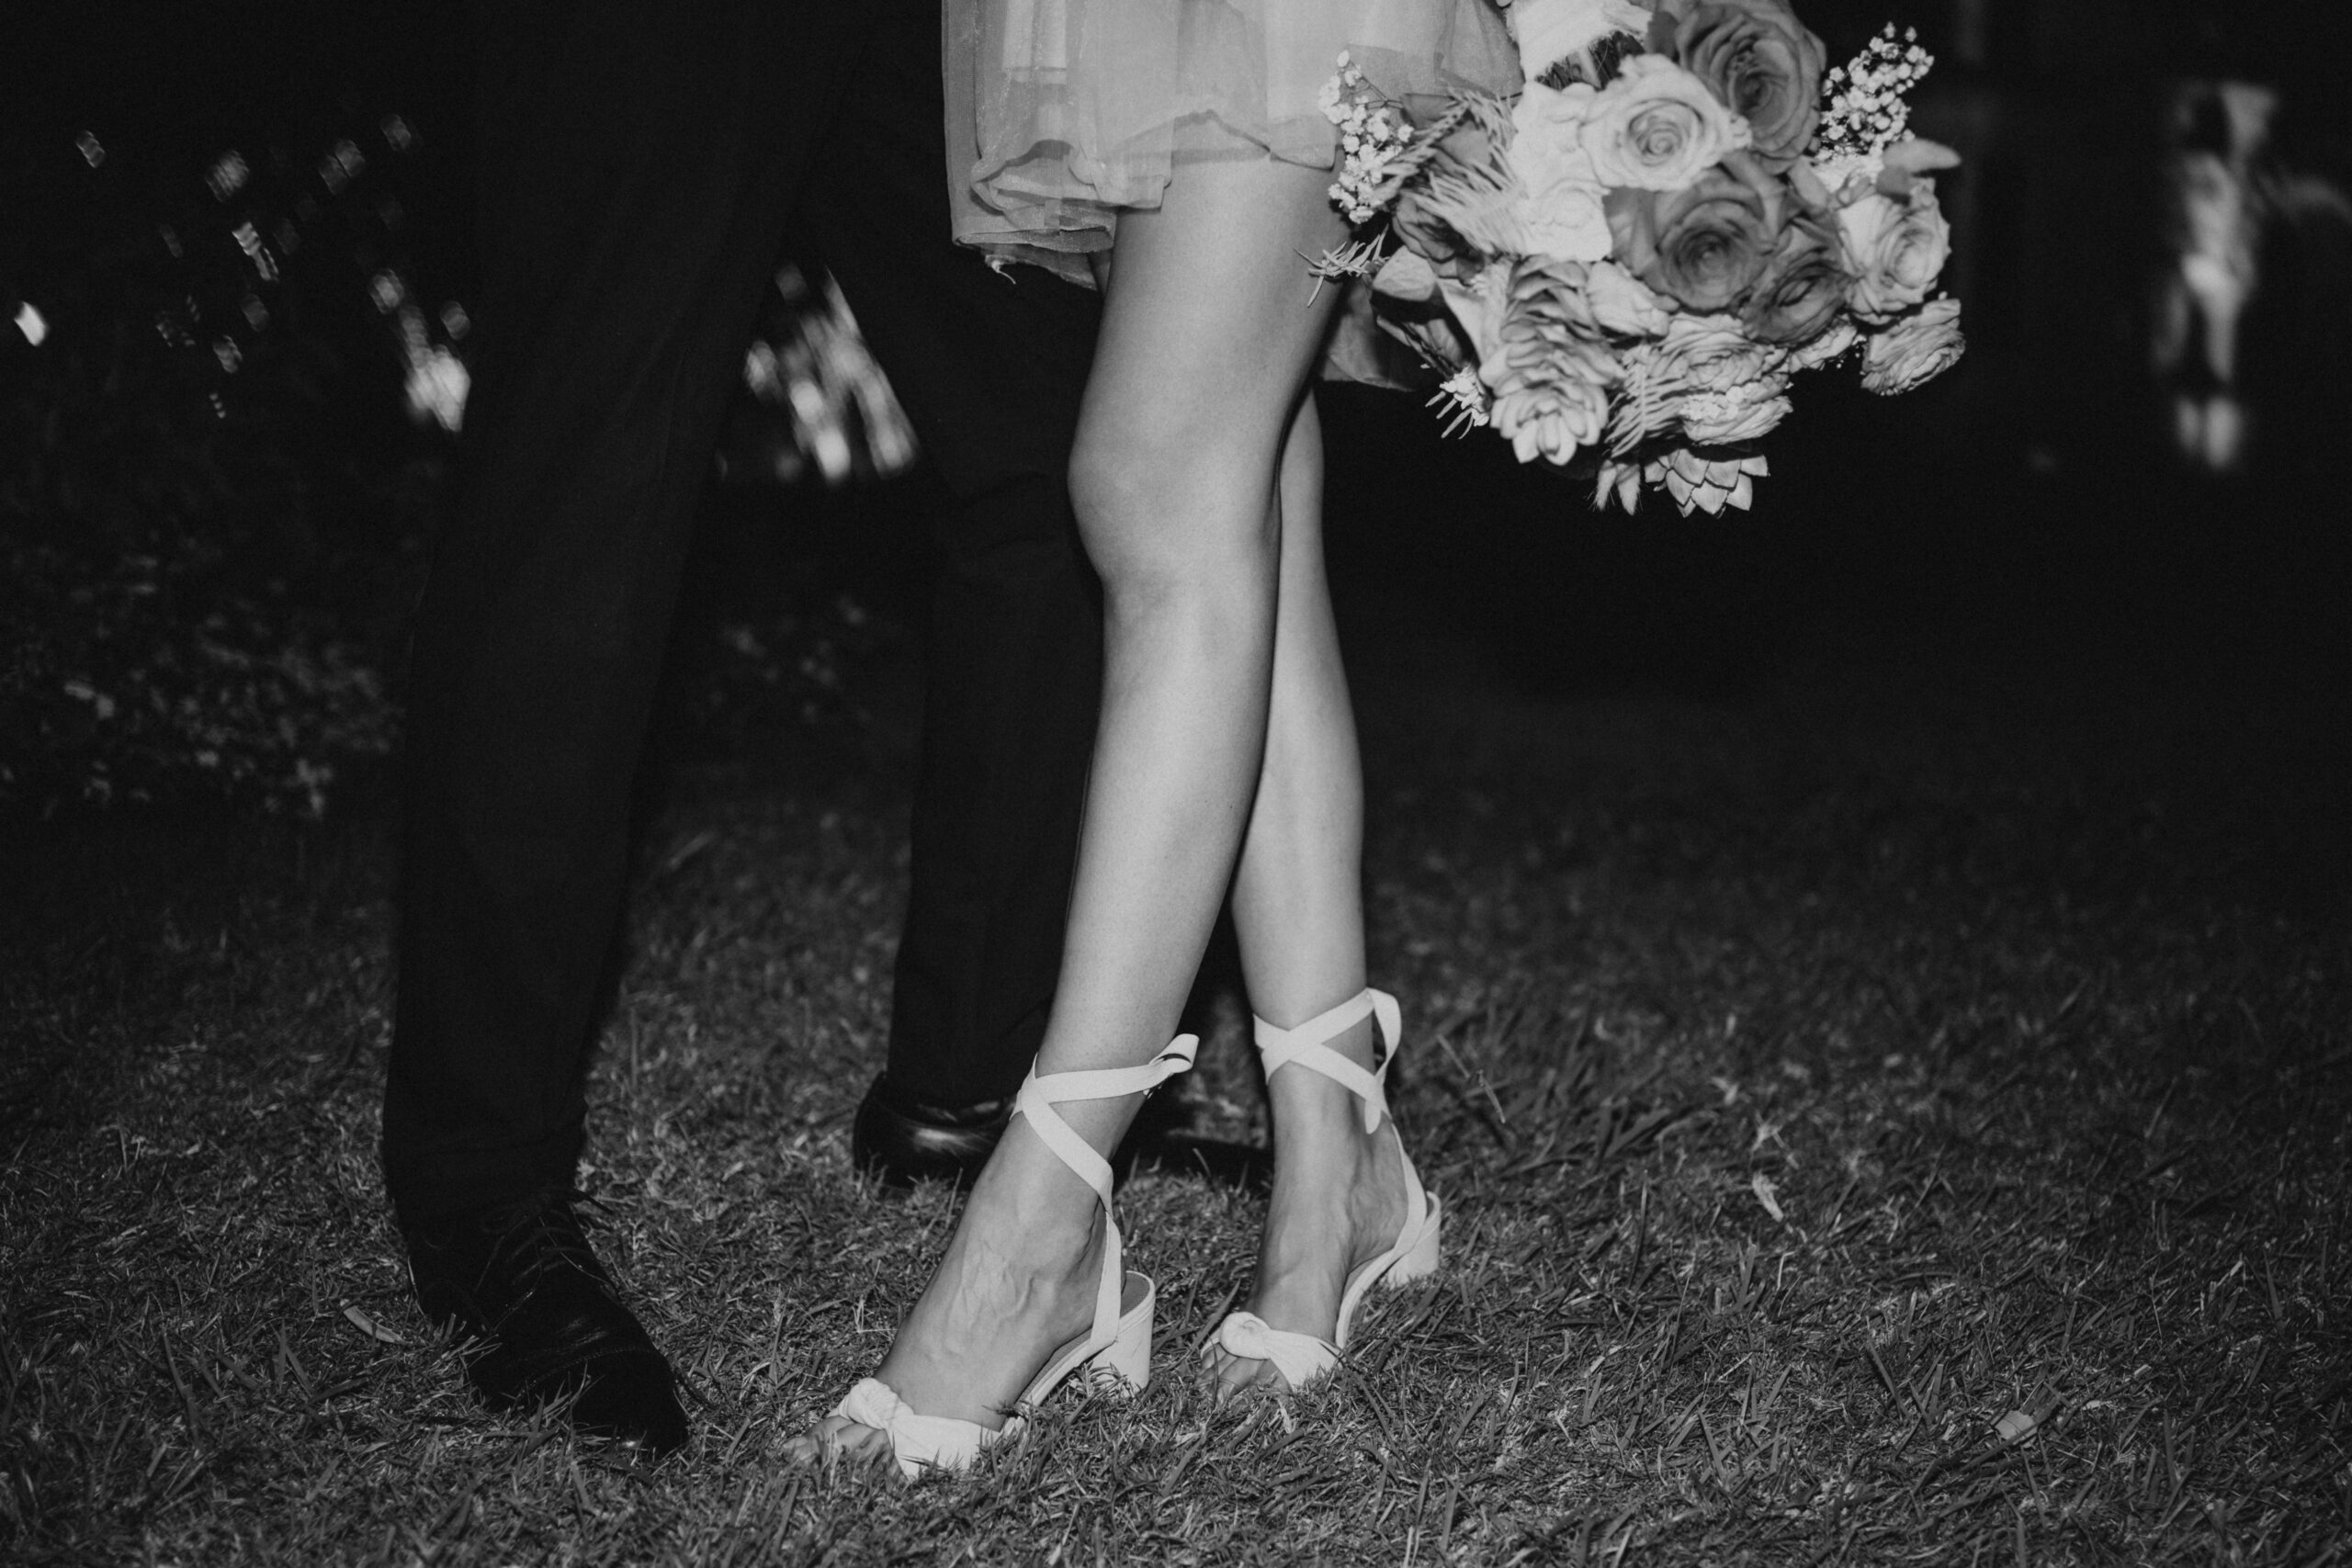 Black and white wedding portrait of bride and grooms legs with floral bouquet